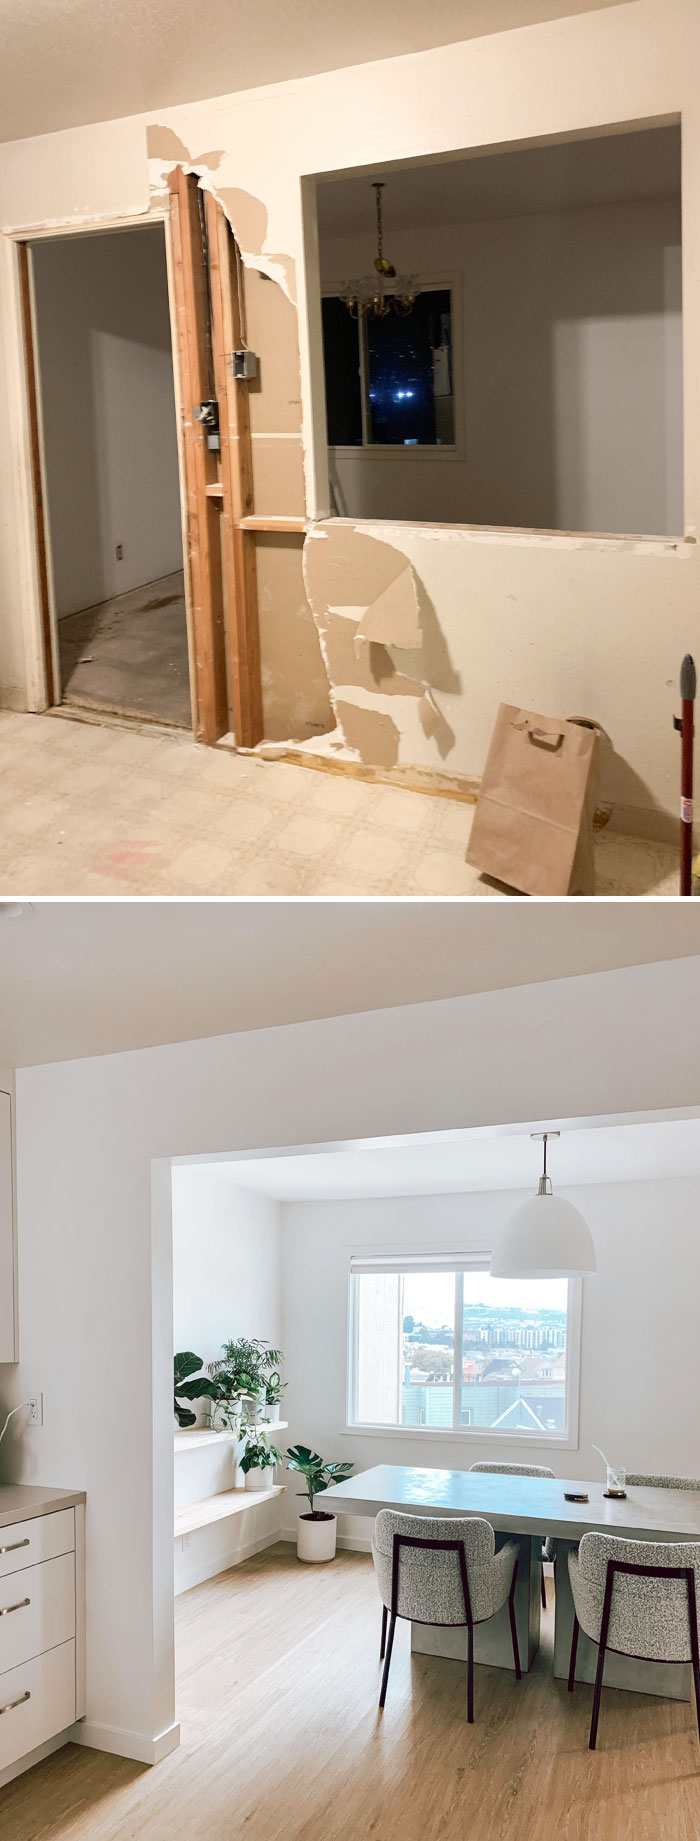 The Process Of Taking Down Our Kitchen Wall And Creating More Of An Open Layout From The Kitchen To The Dining Room. We Love How Spacious This Feels